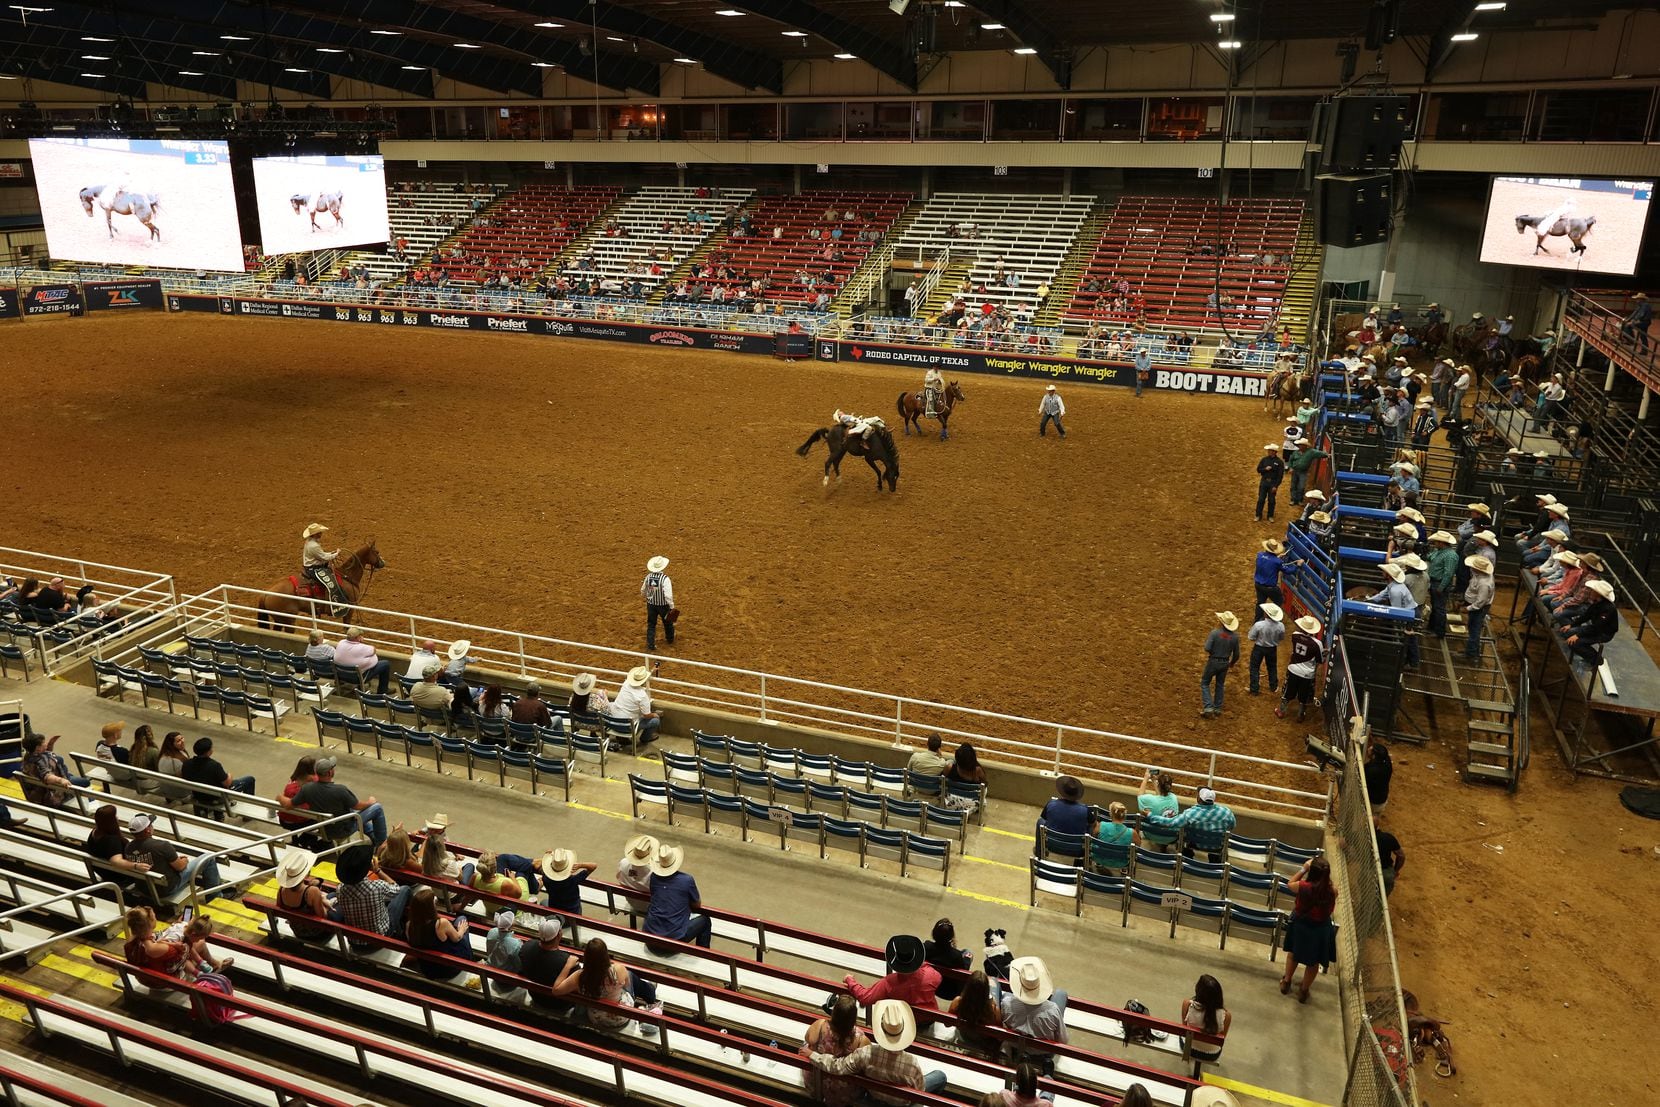 See photos from the Mesquite Championship Rodeo's first weekend